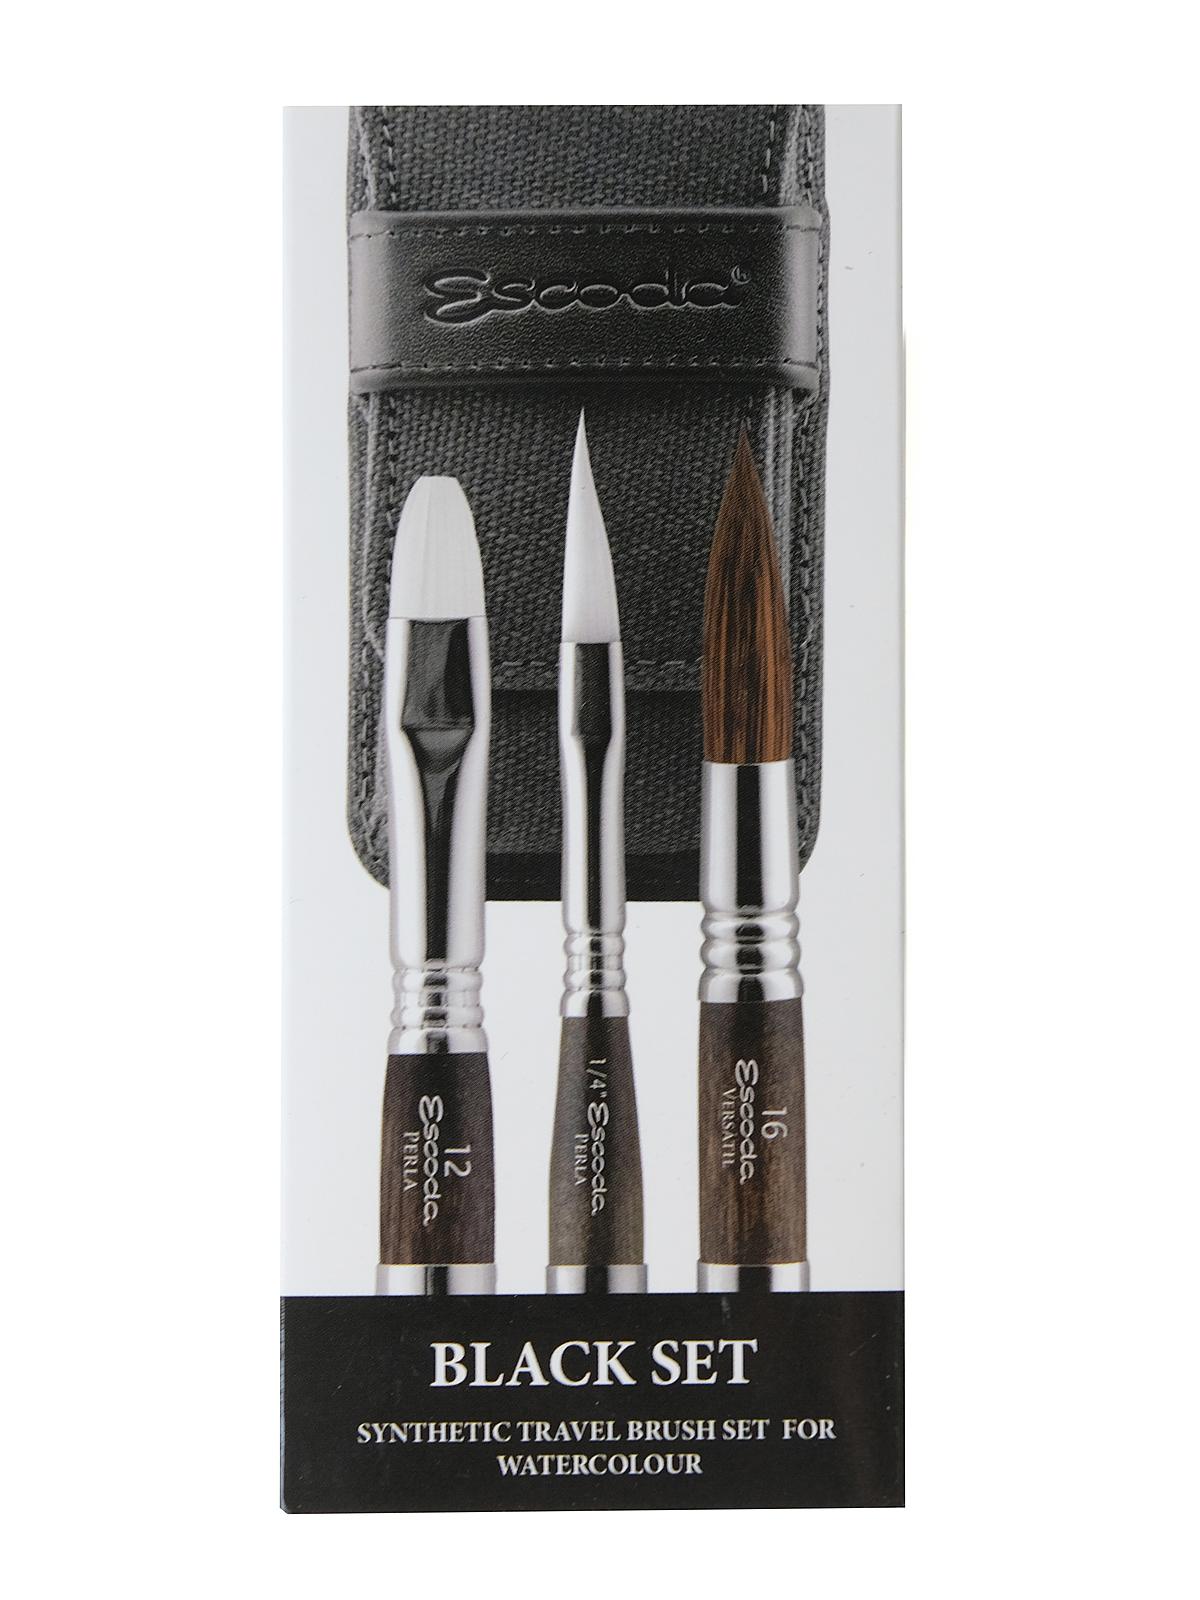 Synthetic Watercolor Travel Brush Sets 1272 Black Series